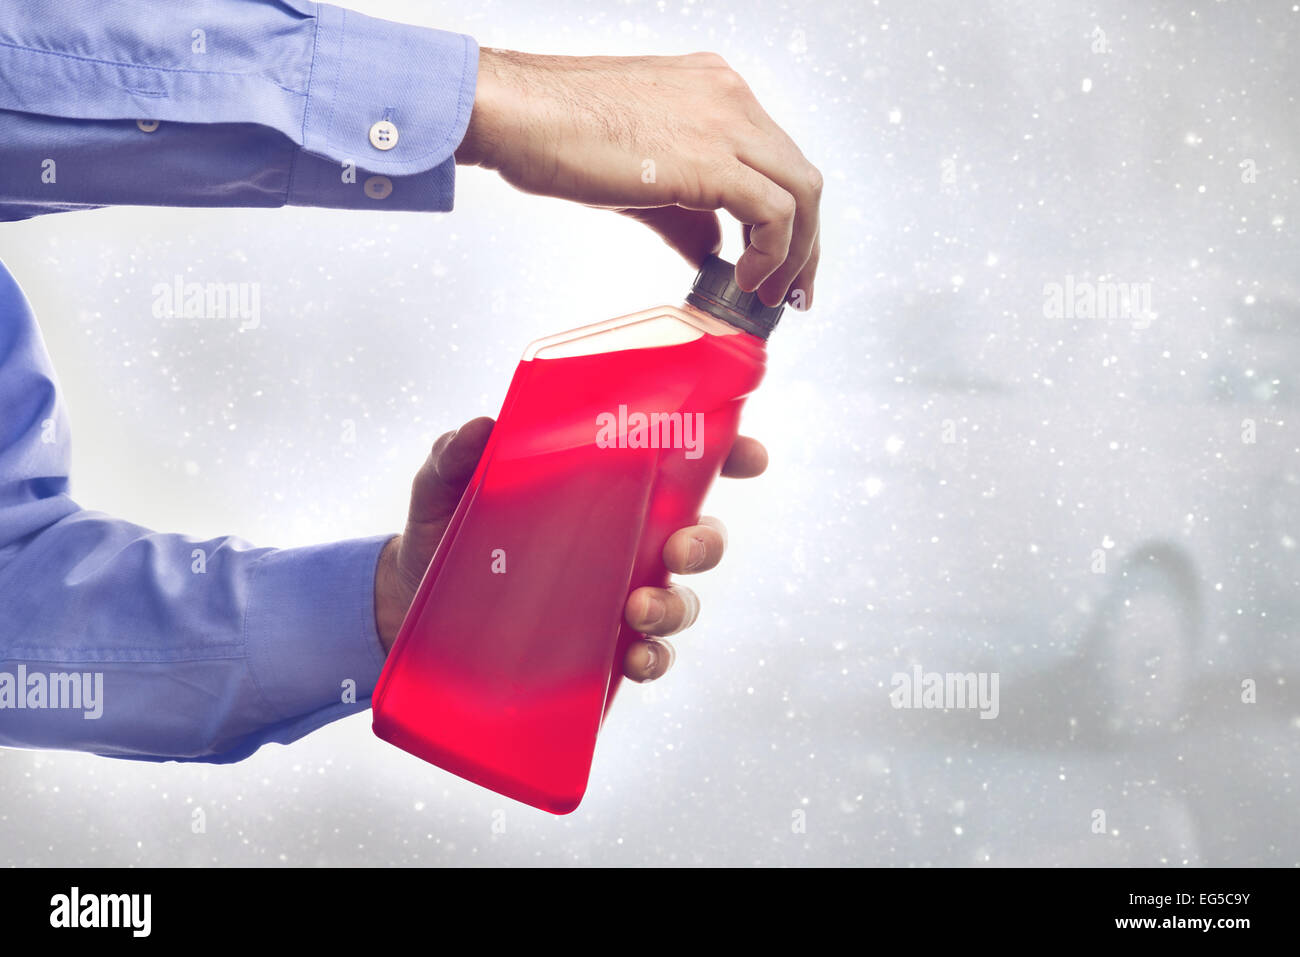 Man with a bottle of antifreeze additive water-based liquid for winter condition driving. Toned image. Stock Photo